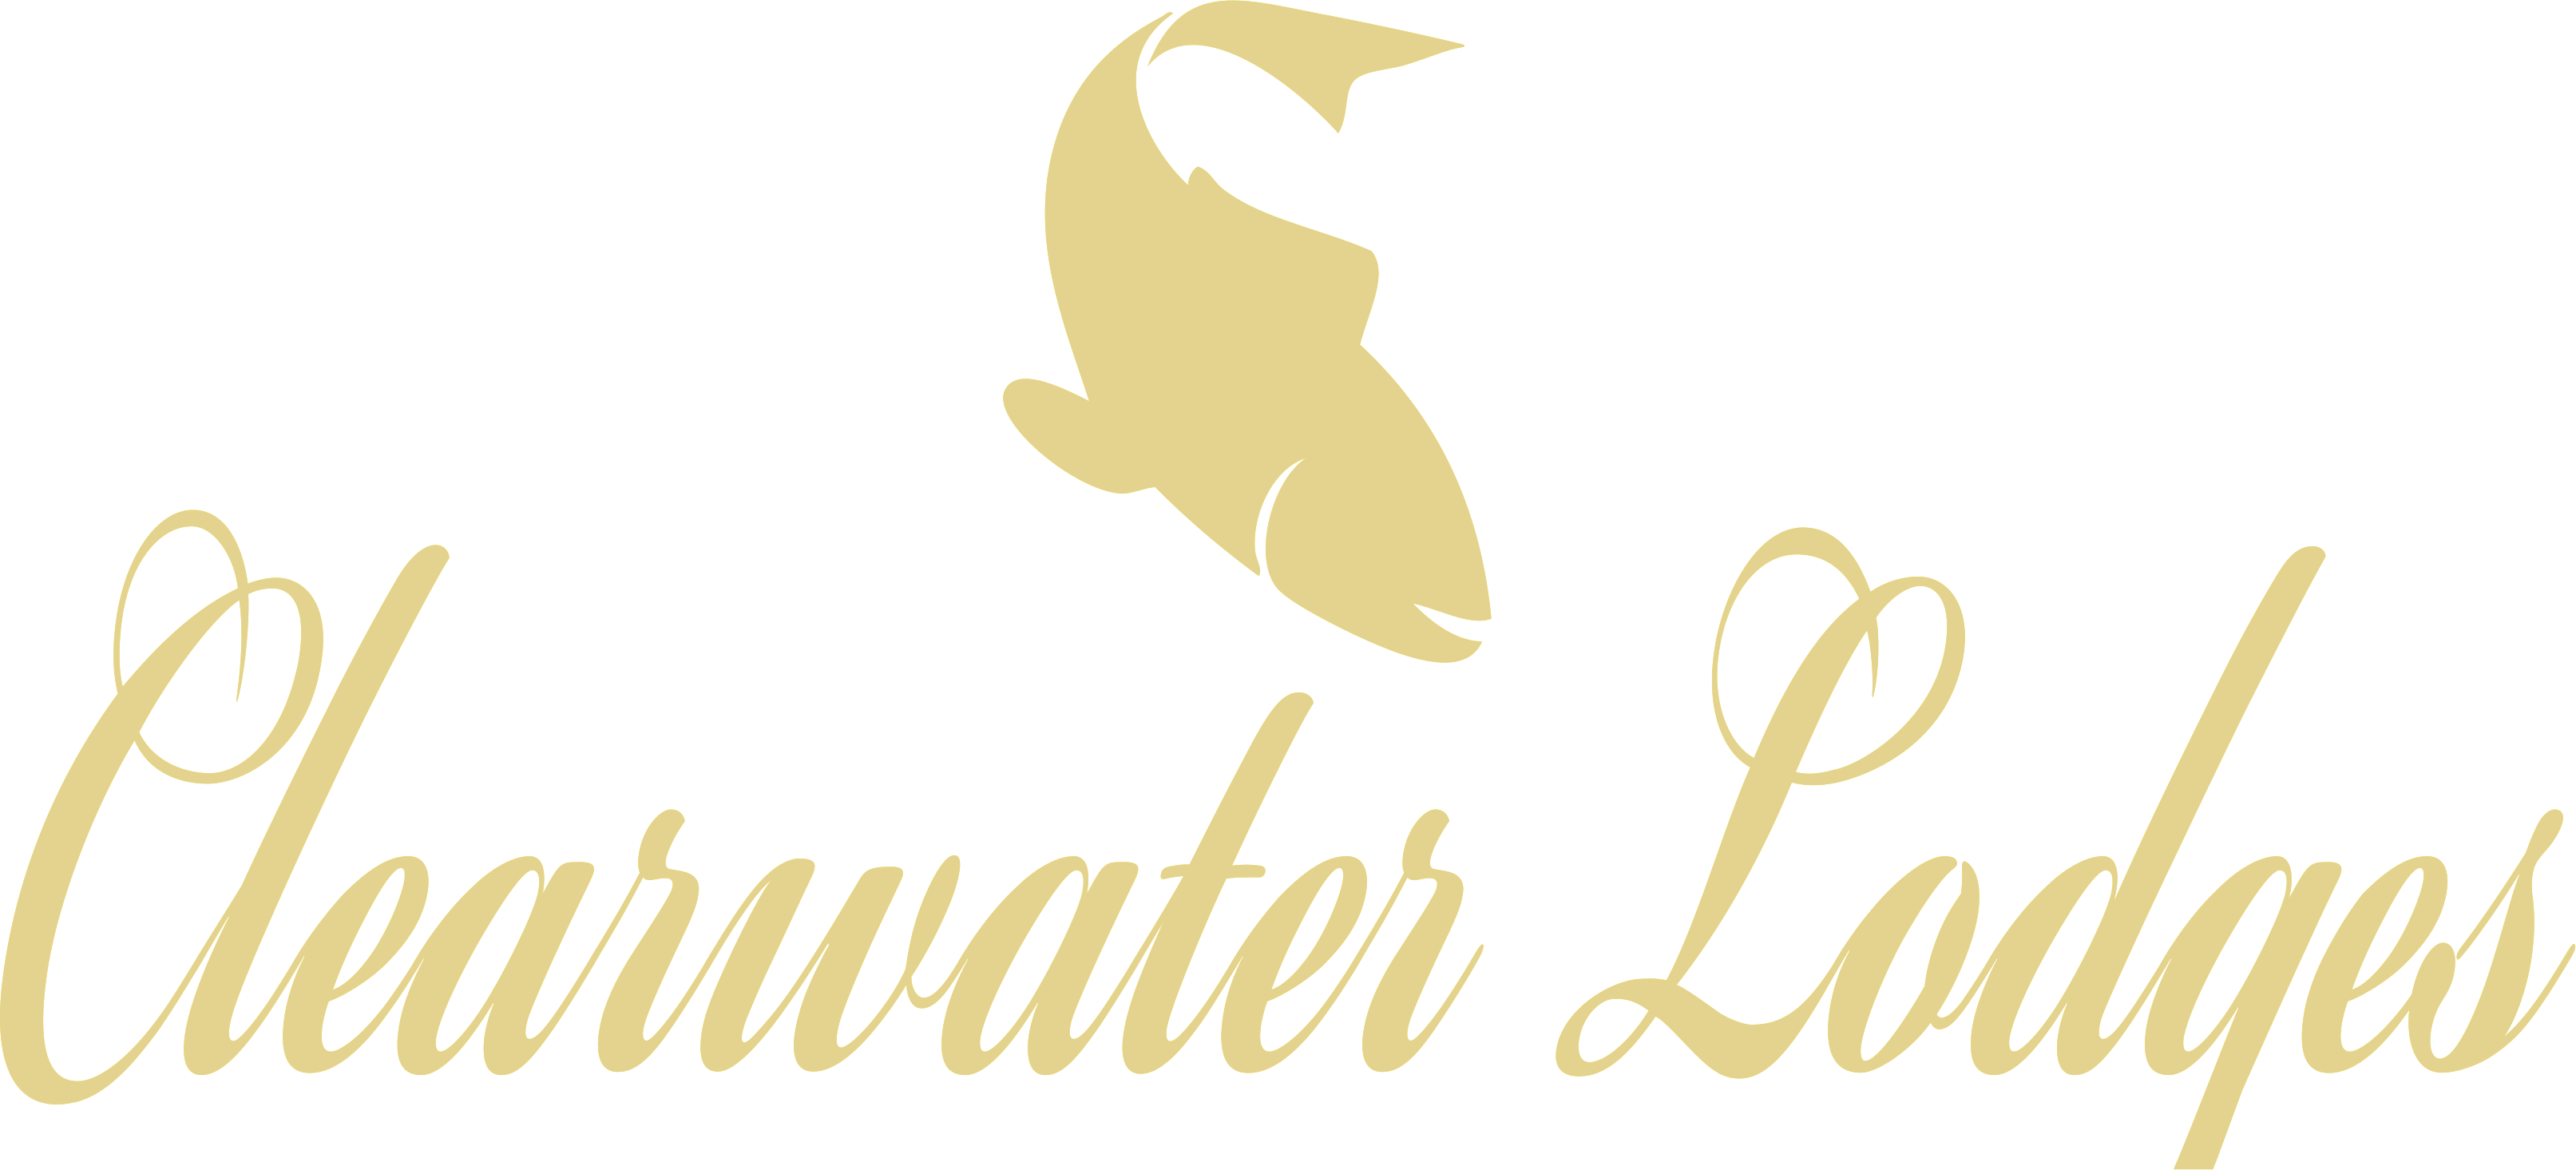 Clearwater Lodges